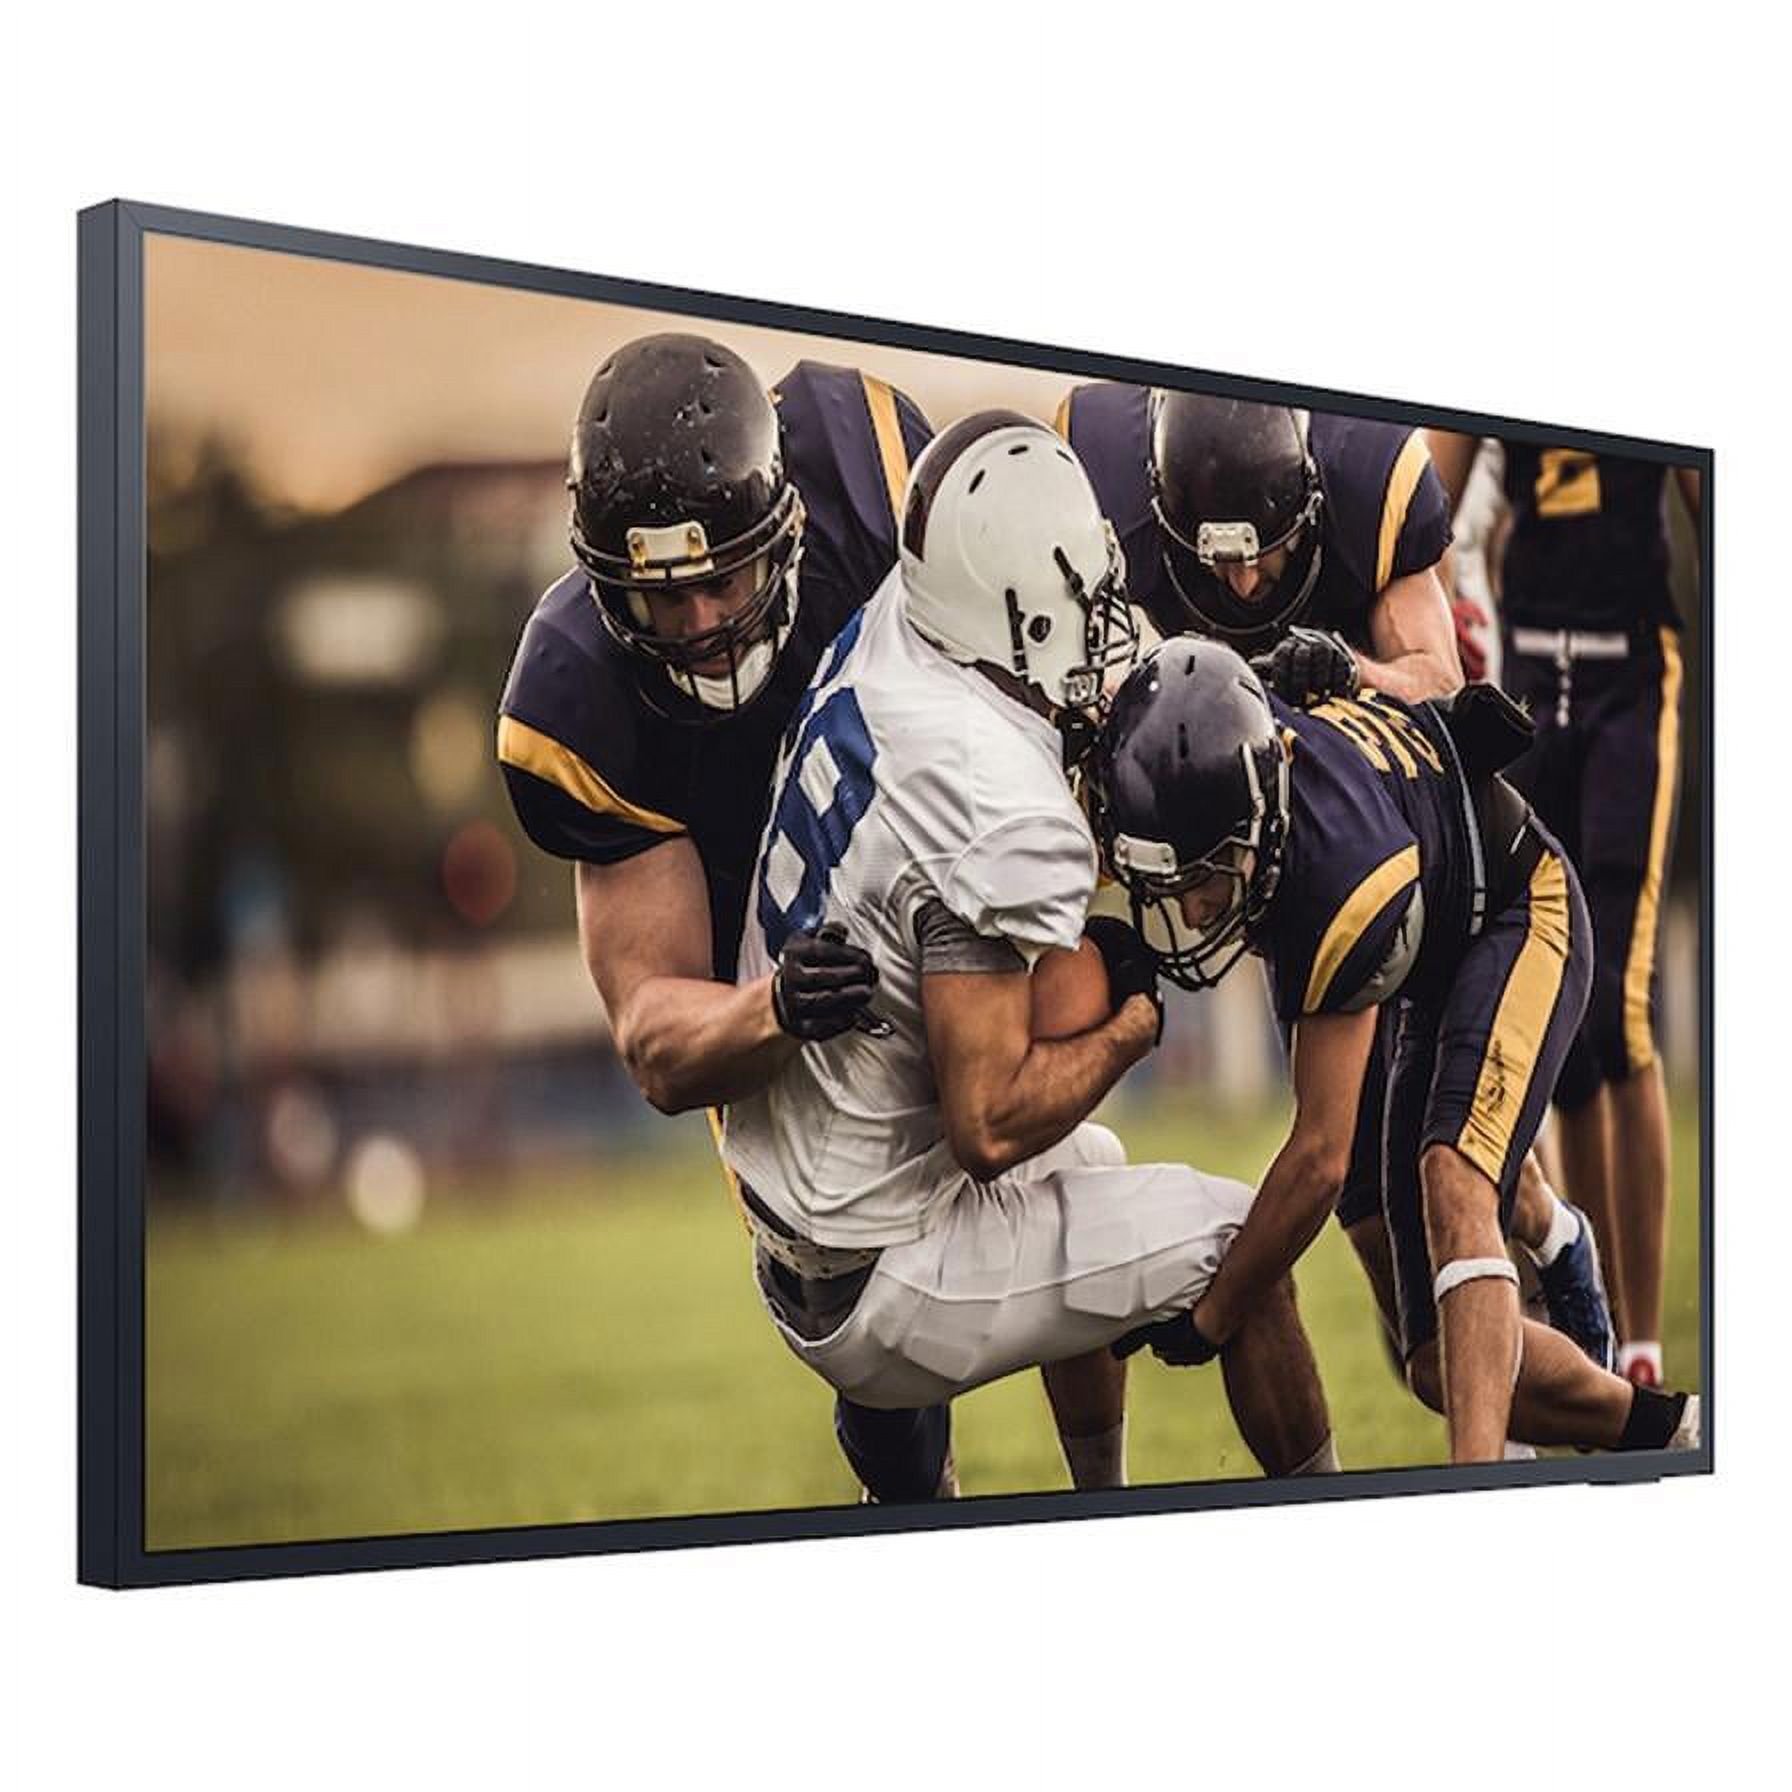 SAMSUNG 65" Class the Terrace Outdoor QLED 4K Smart TV with HDR QN65LST7TAFXZA - image 5 of 27